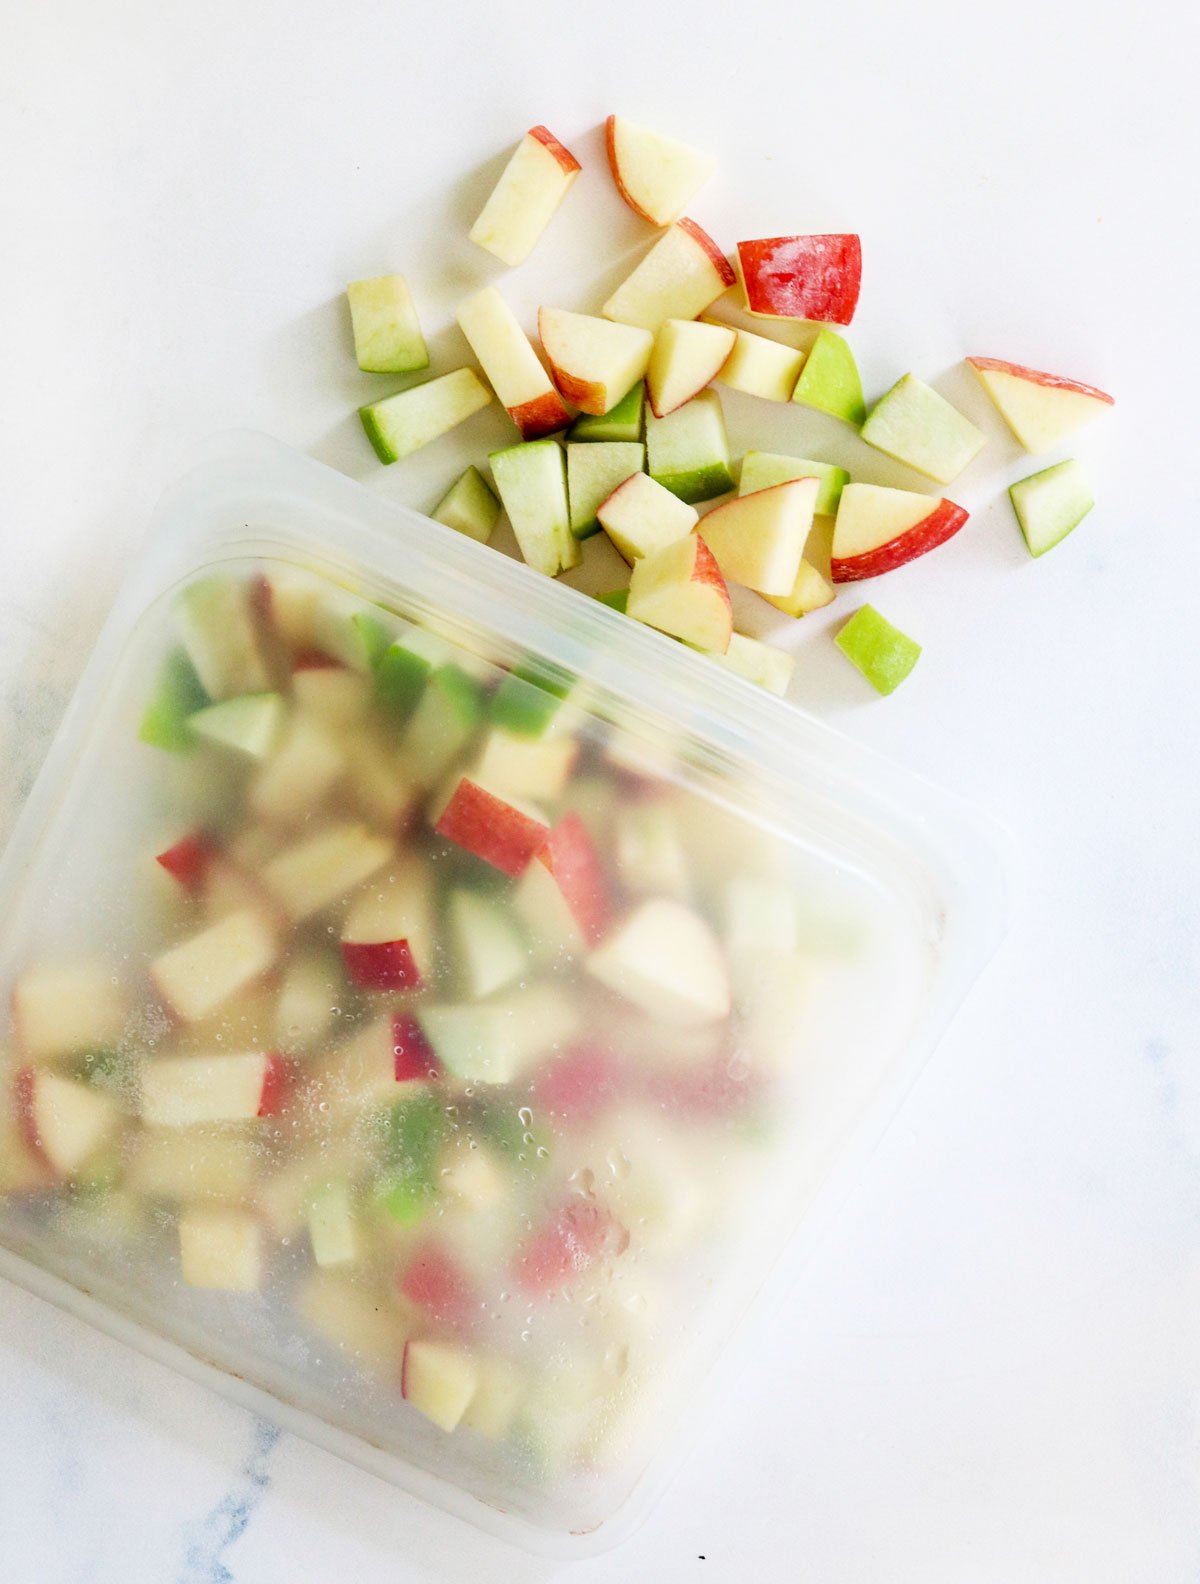 I learned a method to keep apple slices fresh that doesn't involve